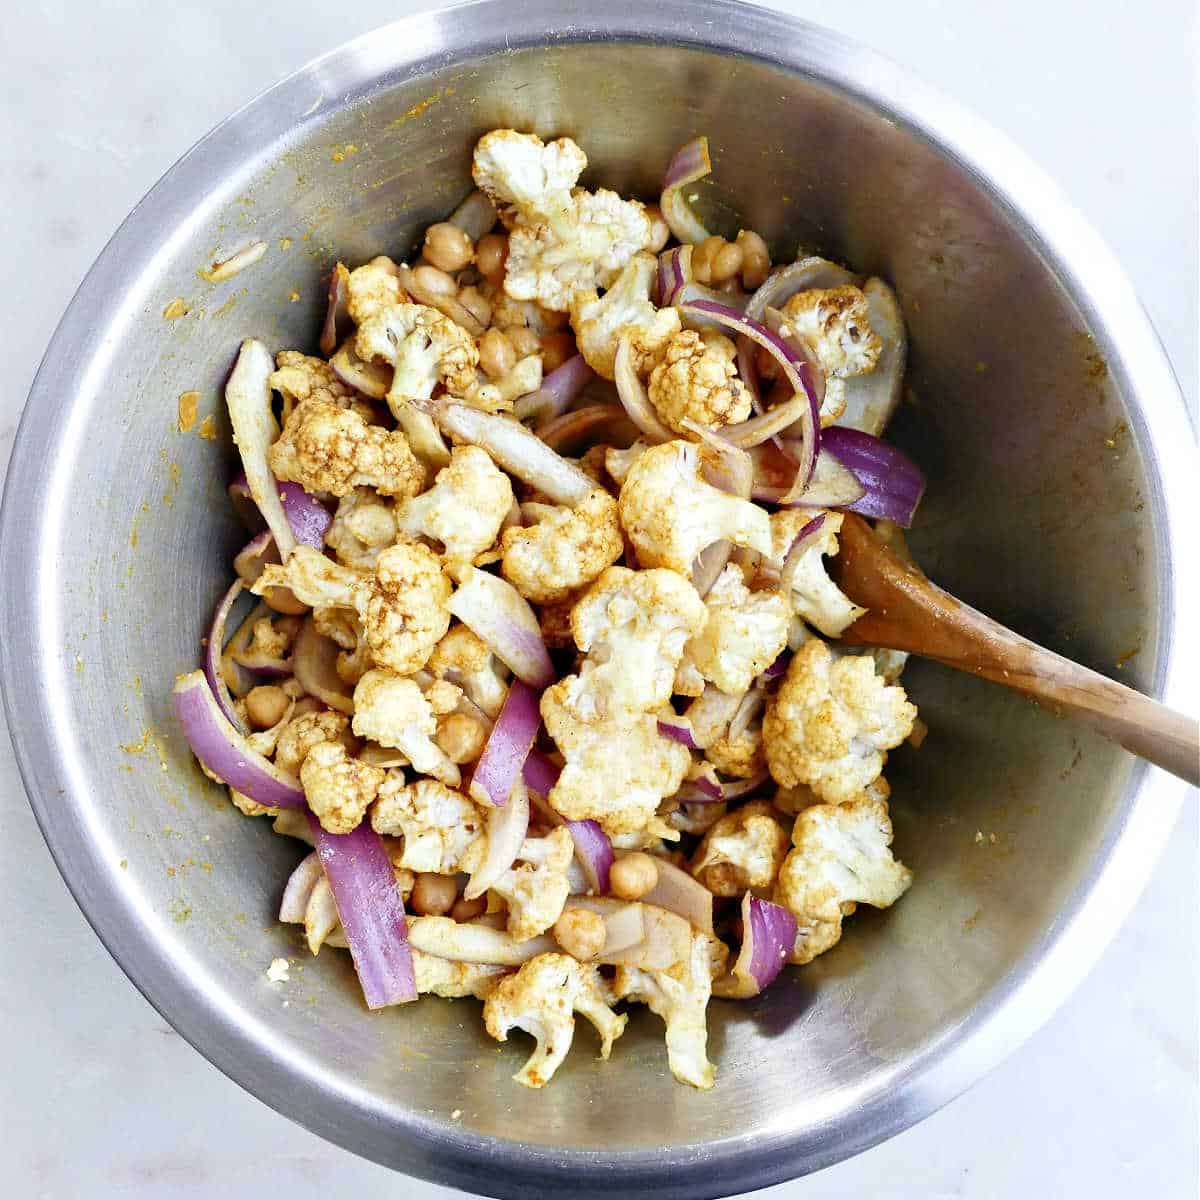 cauliflower, chickpeas, and red onions tossed with seasonings in a bowl